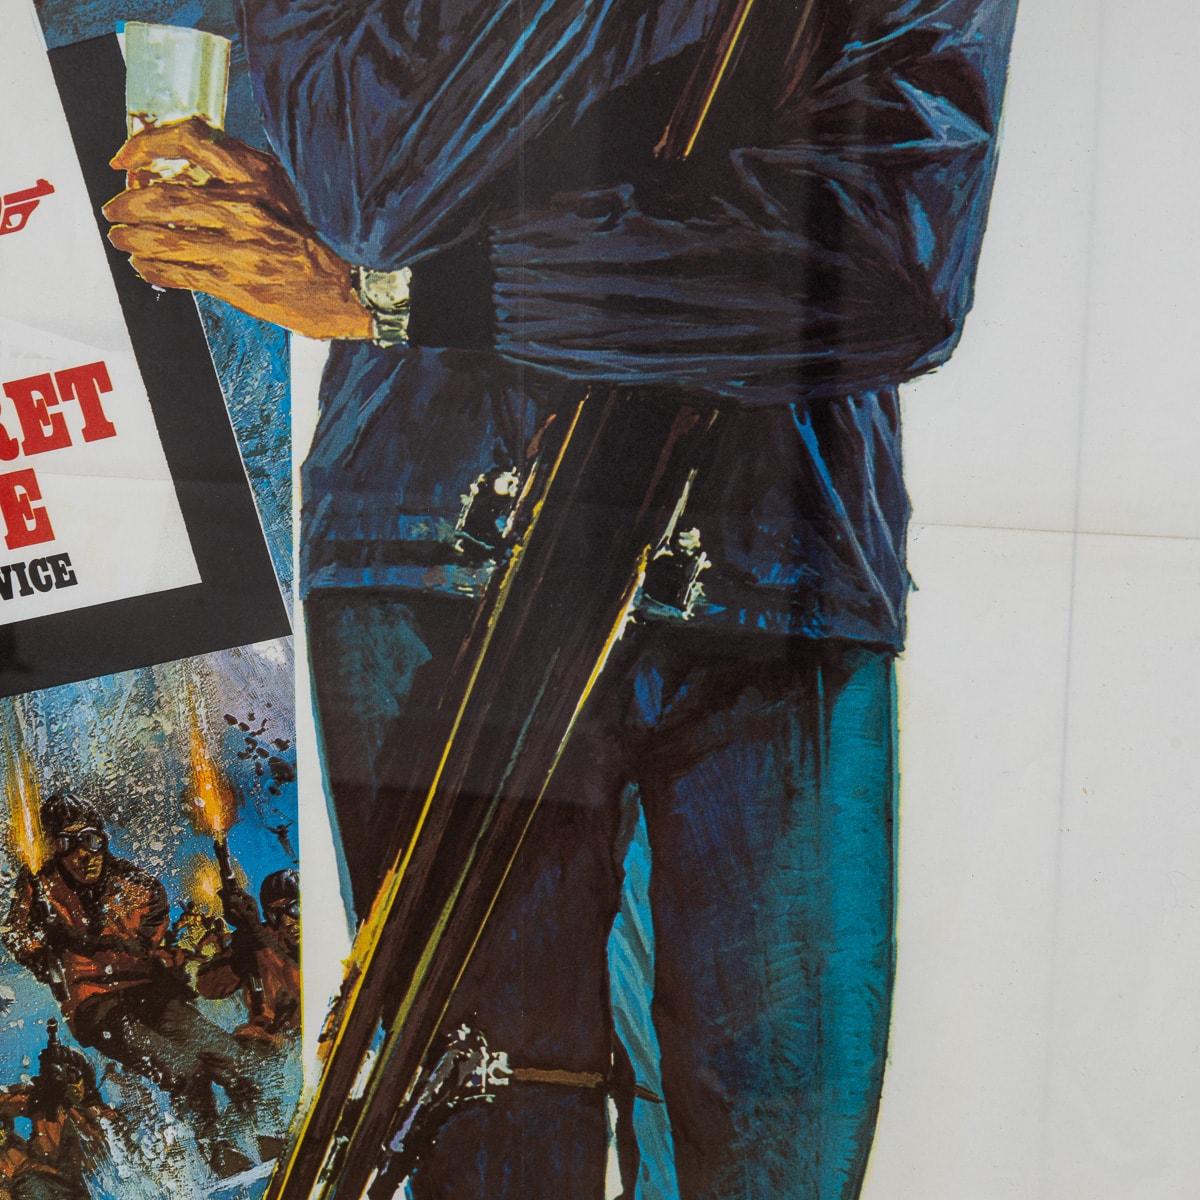 French Release James Bond 007 'On Her Majesty's Secret Service' Poster c.1969 For Sale 1